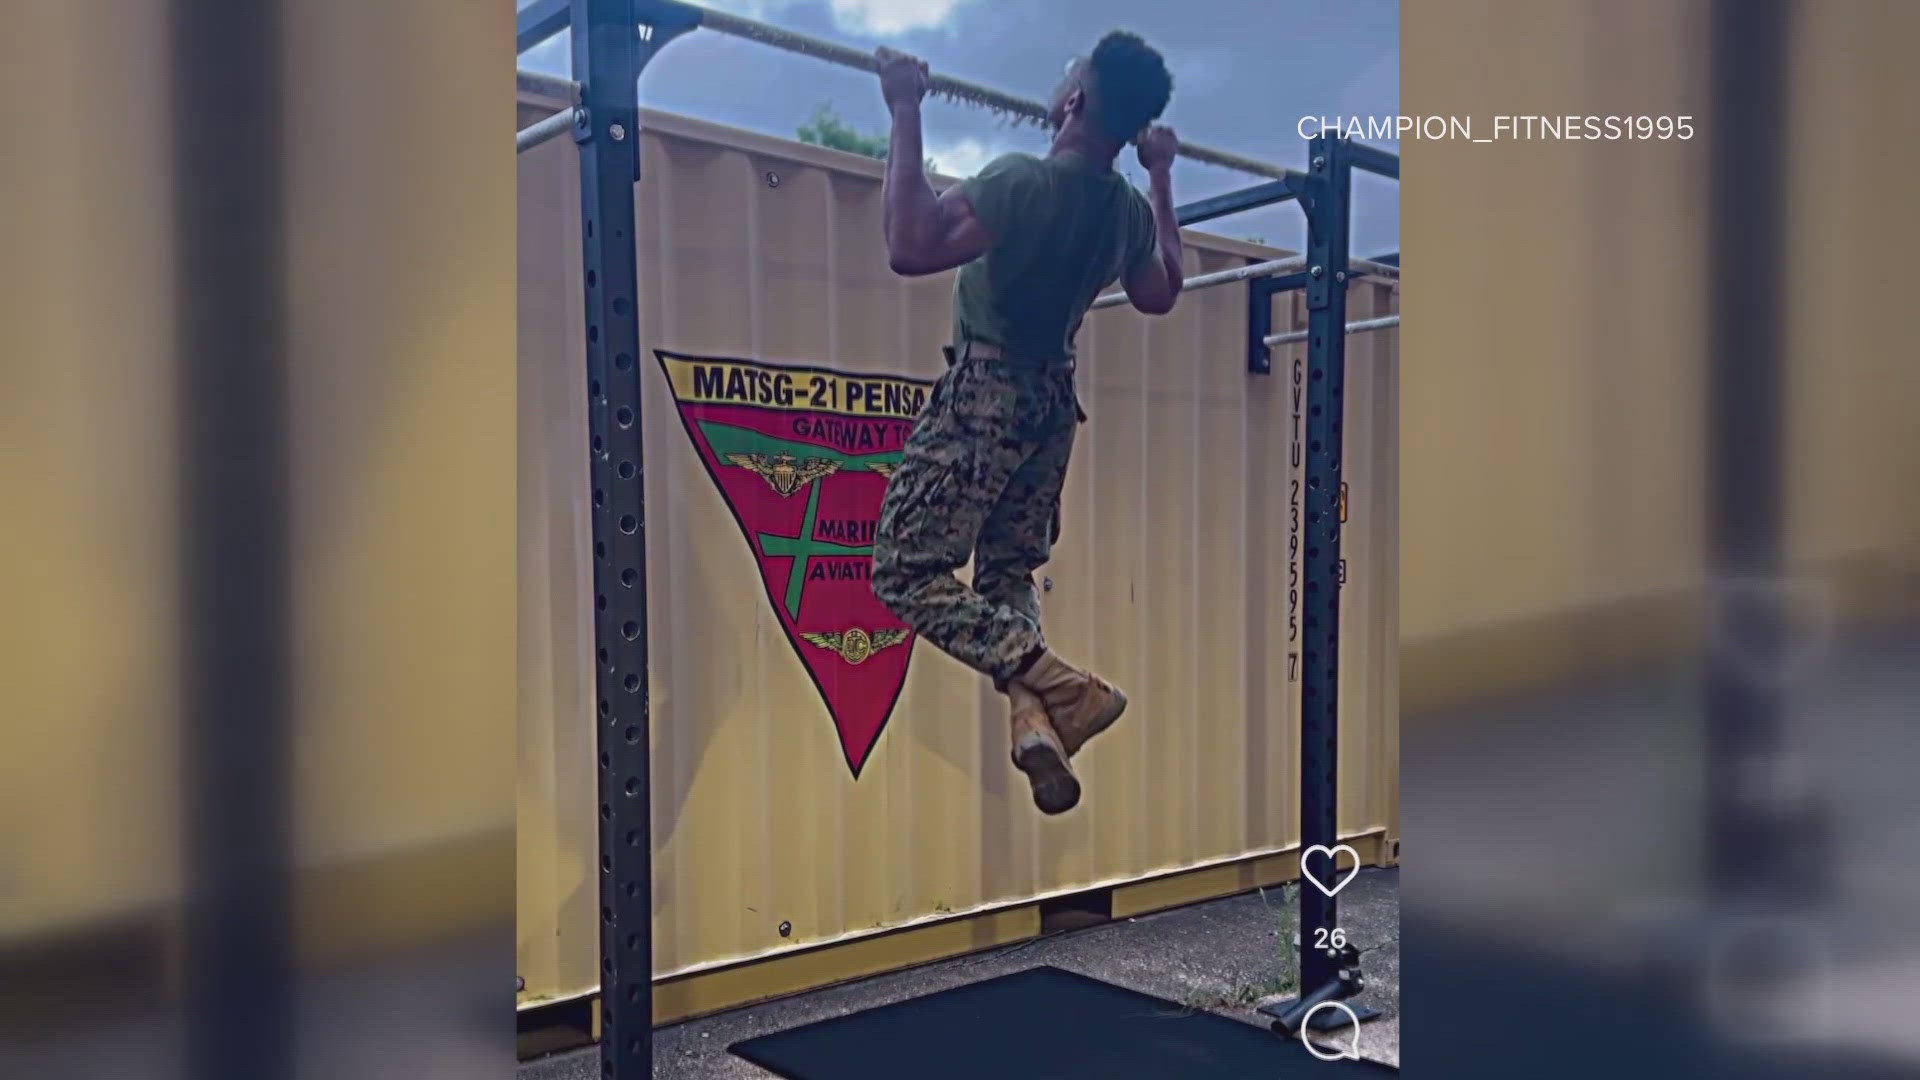 A local Marine is putting his strength to the test. He hopes to take home the "Mr. Health and Fitness" title to give back to people in need.